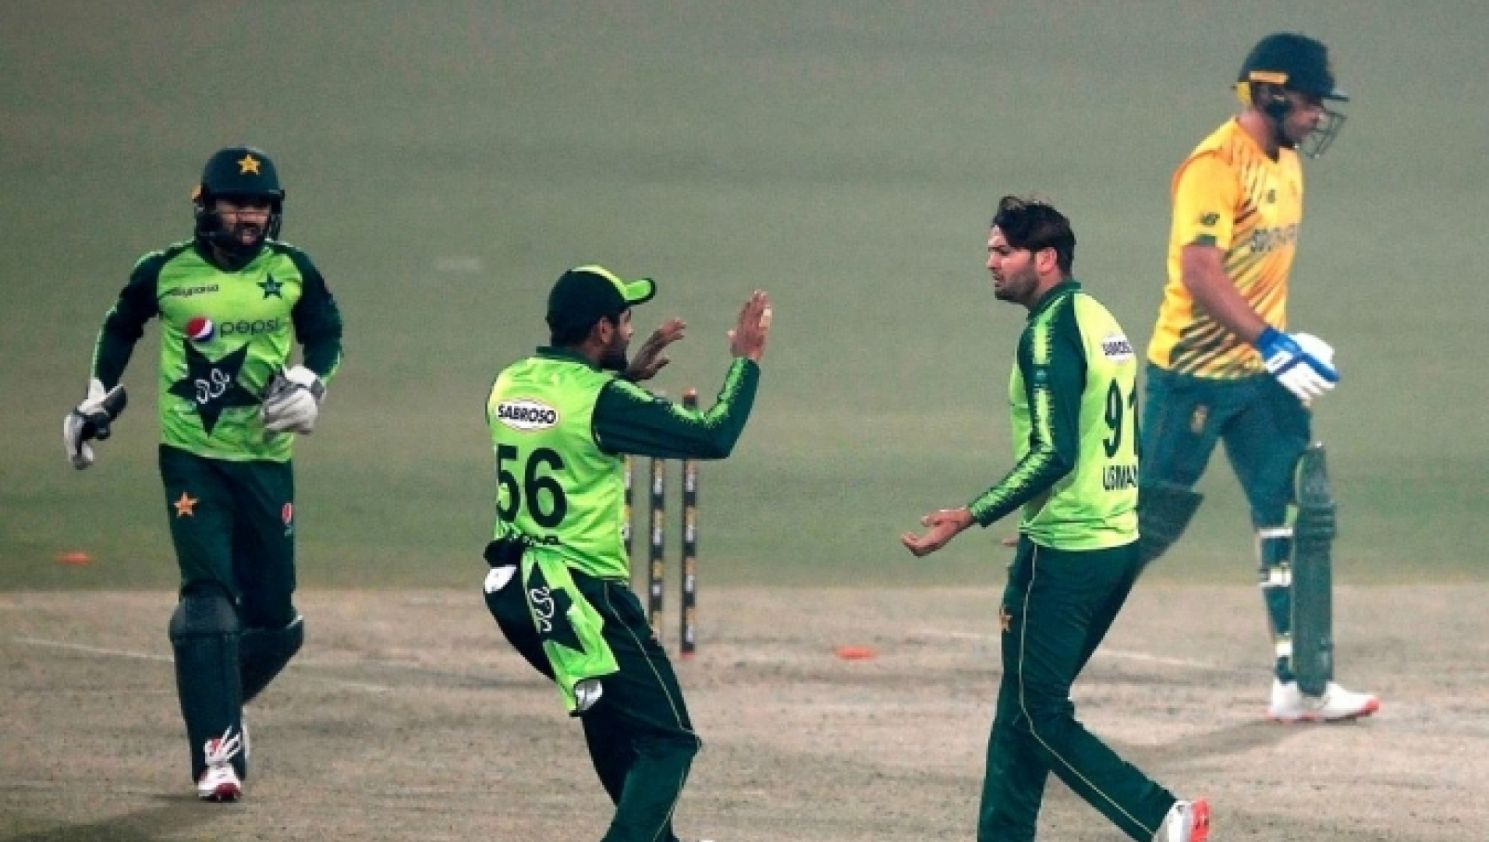 Pakistan eye series win as young, energetic Proteas aim to draw level